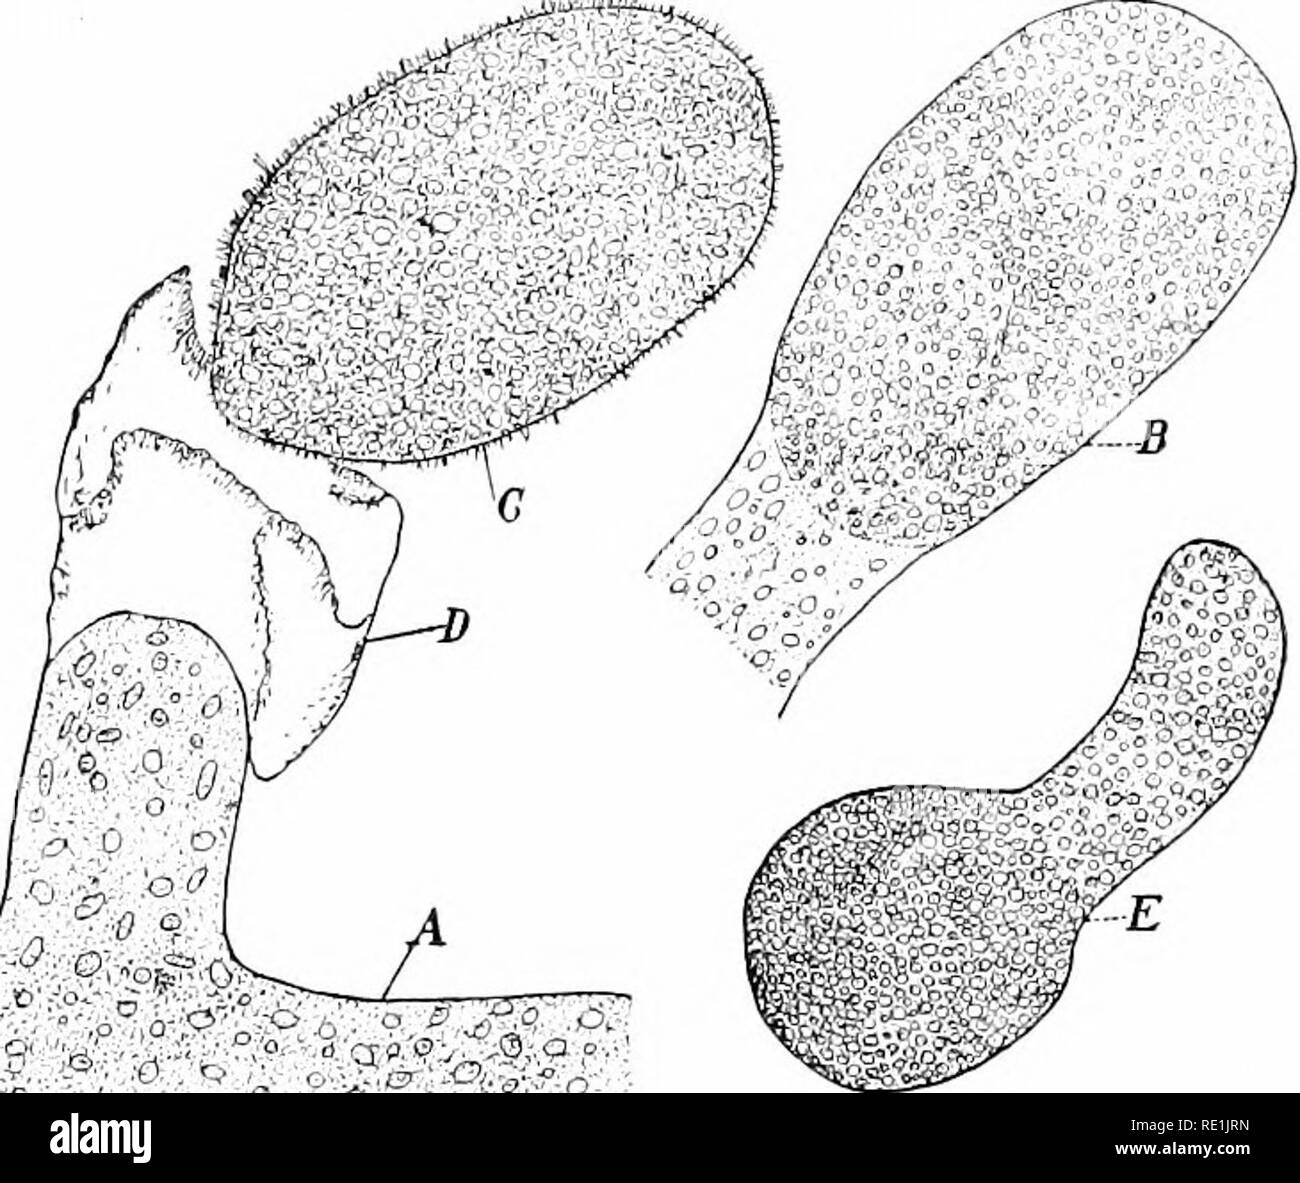 . Plant studies; an elementary botany. Botany. 242 PLANT STUDIES in rivers and lakes (Fig. 207). The cells are long and densely crowded with chloroplasts ; and in certain cells at the tips of branches large numbers of zoospores are formed, which have two cilia at the pointed end, and hence are said to be biciliate. 166. Vaucheria.—This is one of the most common of the Green Algse, found in felt-like masses of coarse filaments in shallow water and on muddy banks, and often called &quot; green j^jfflSSSs.. Fig. 208. Vaucheria geminata, a Siphon form, showing a portion of the ccenocytic body (A)  Stock Photo